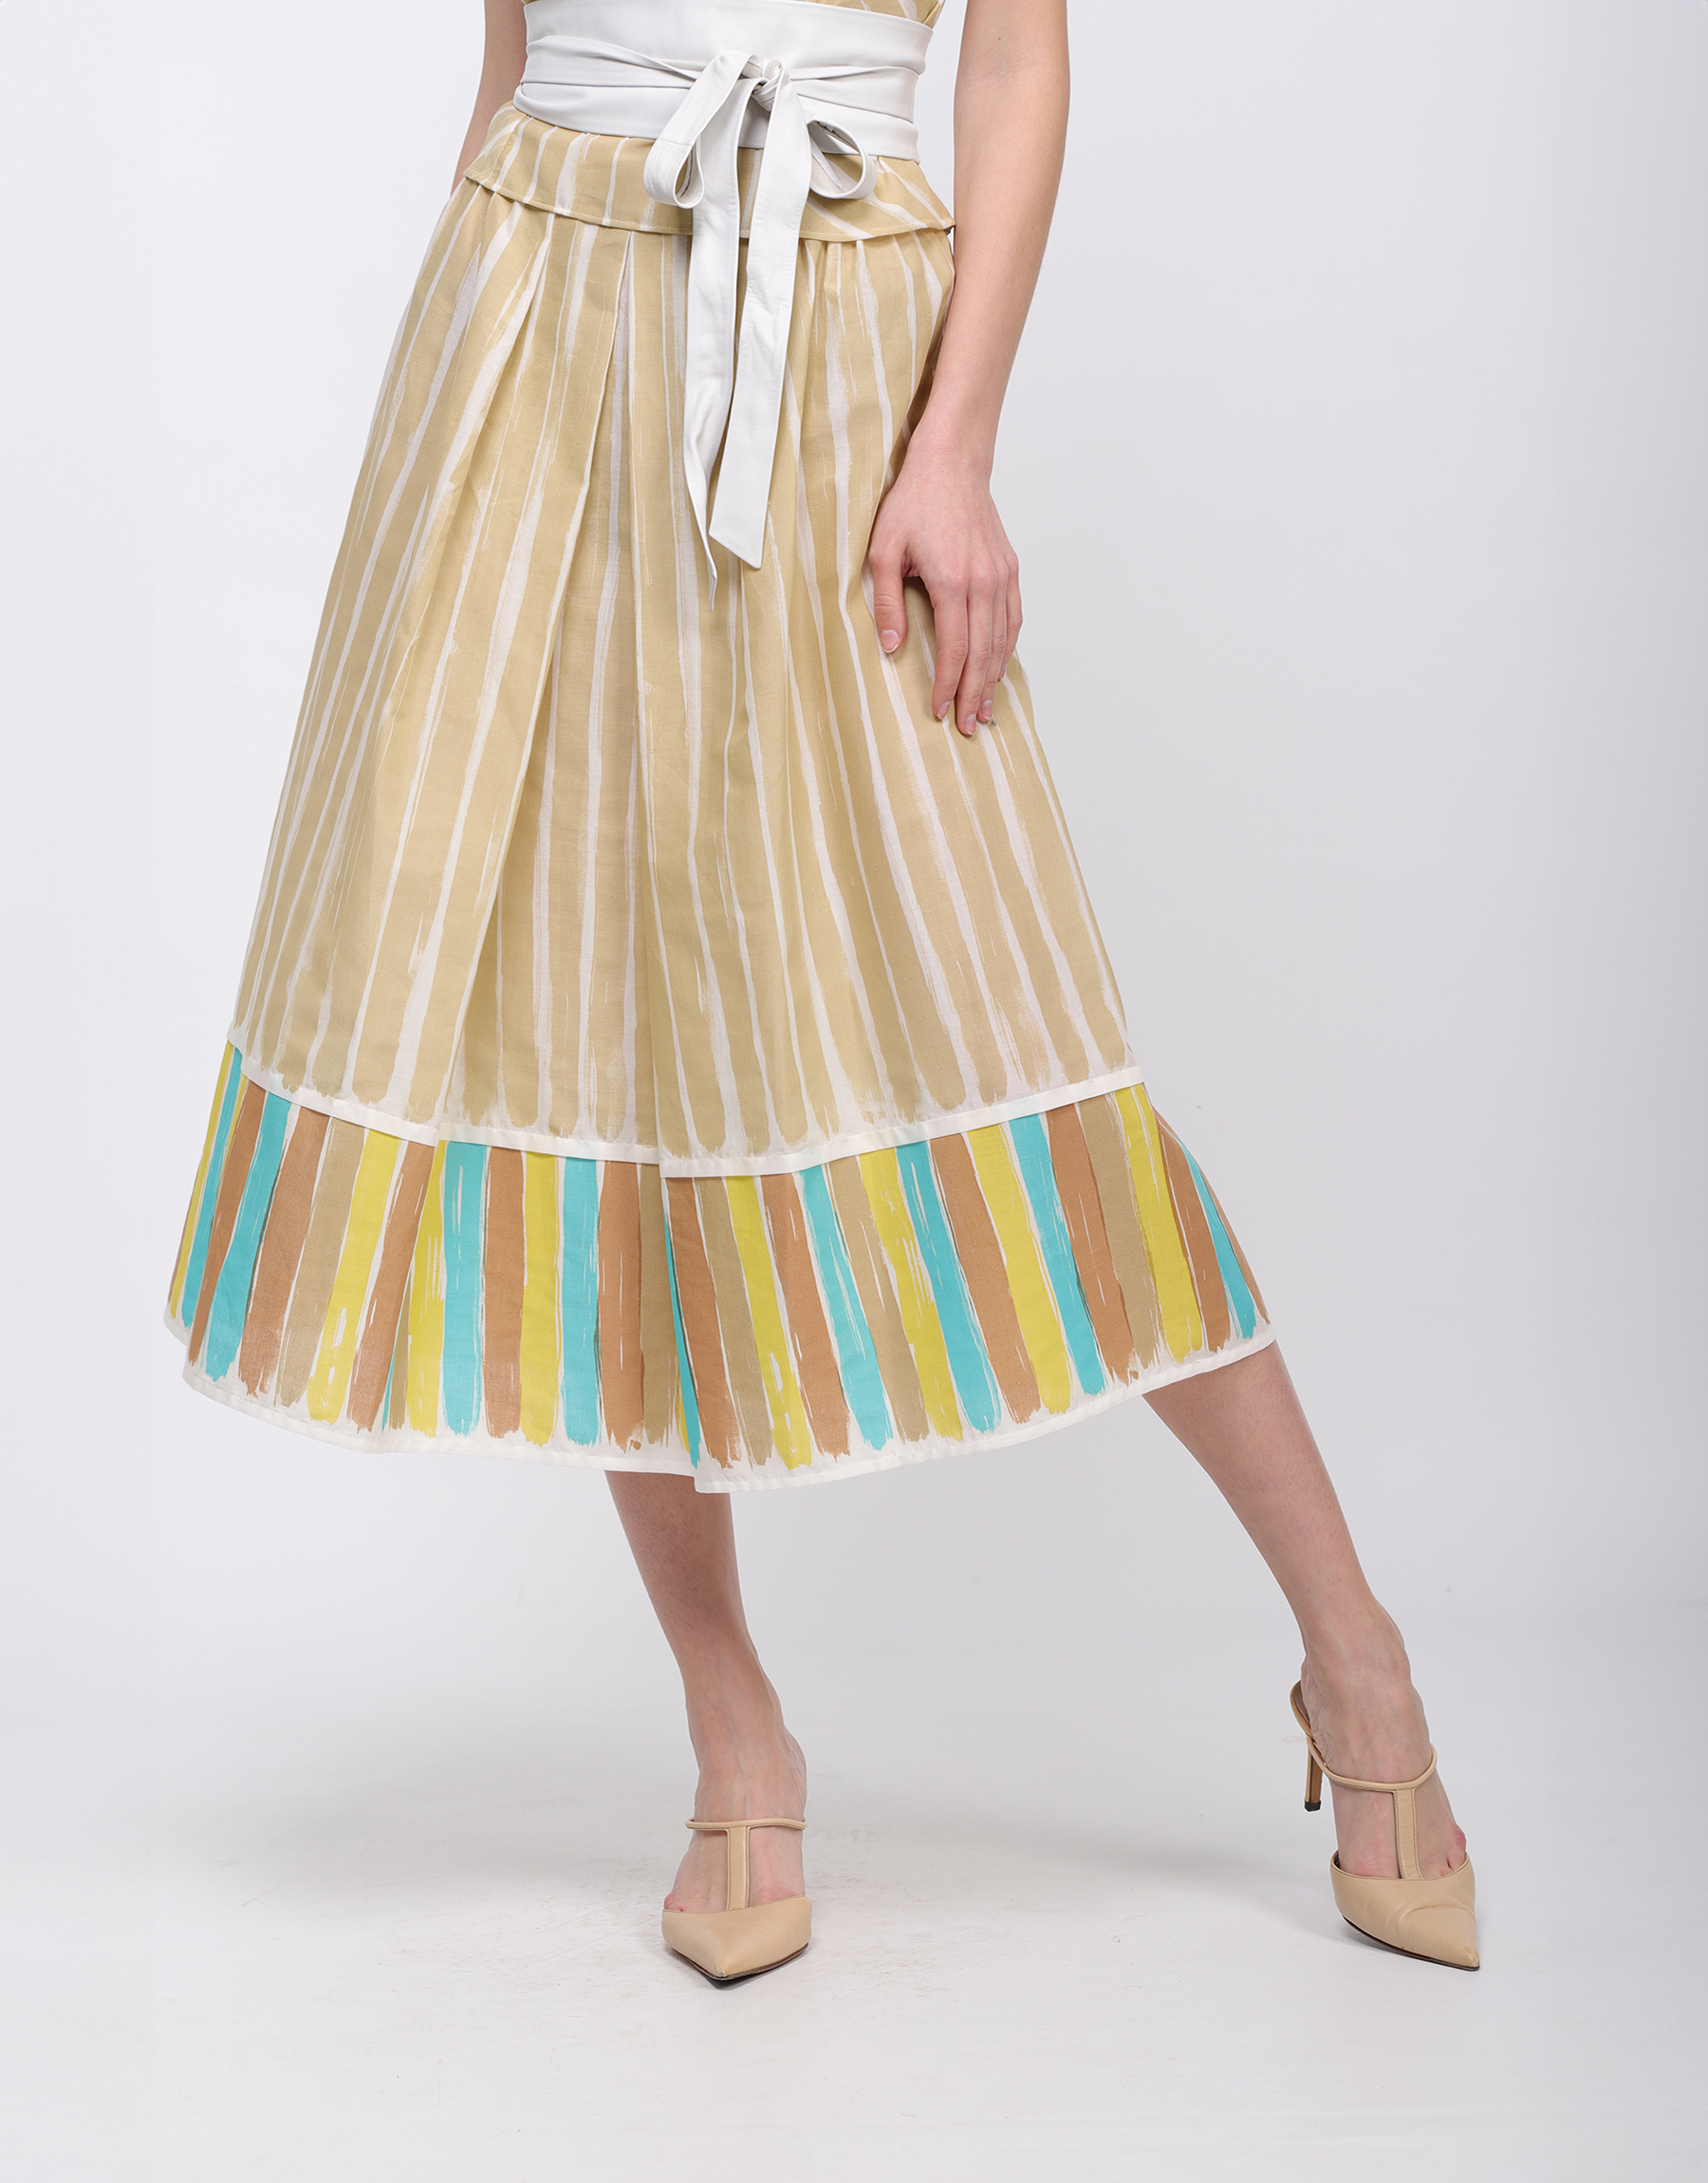 Long pleated skirt in beige and turquoise printed white cotton canvas